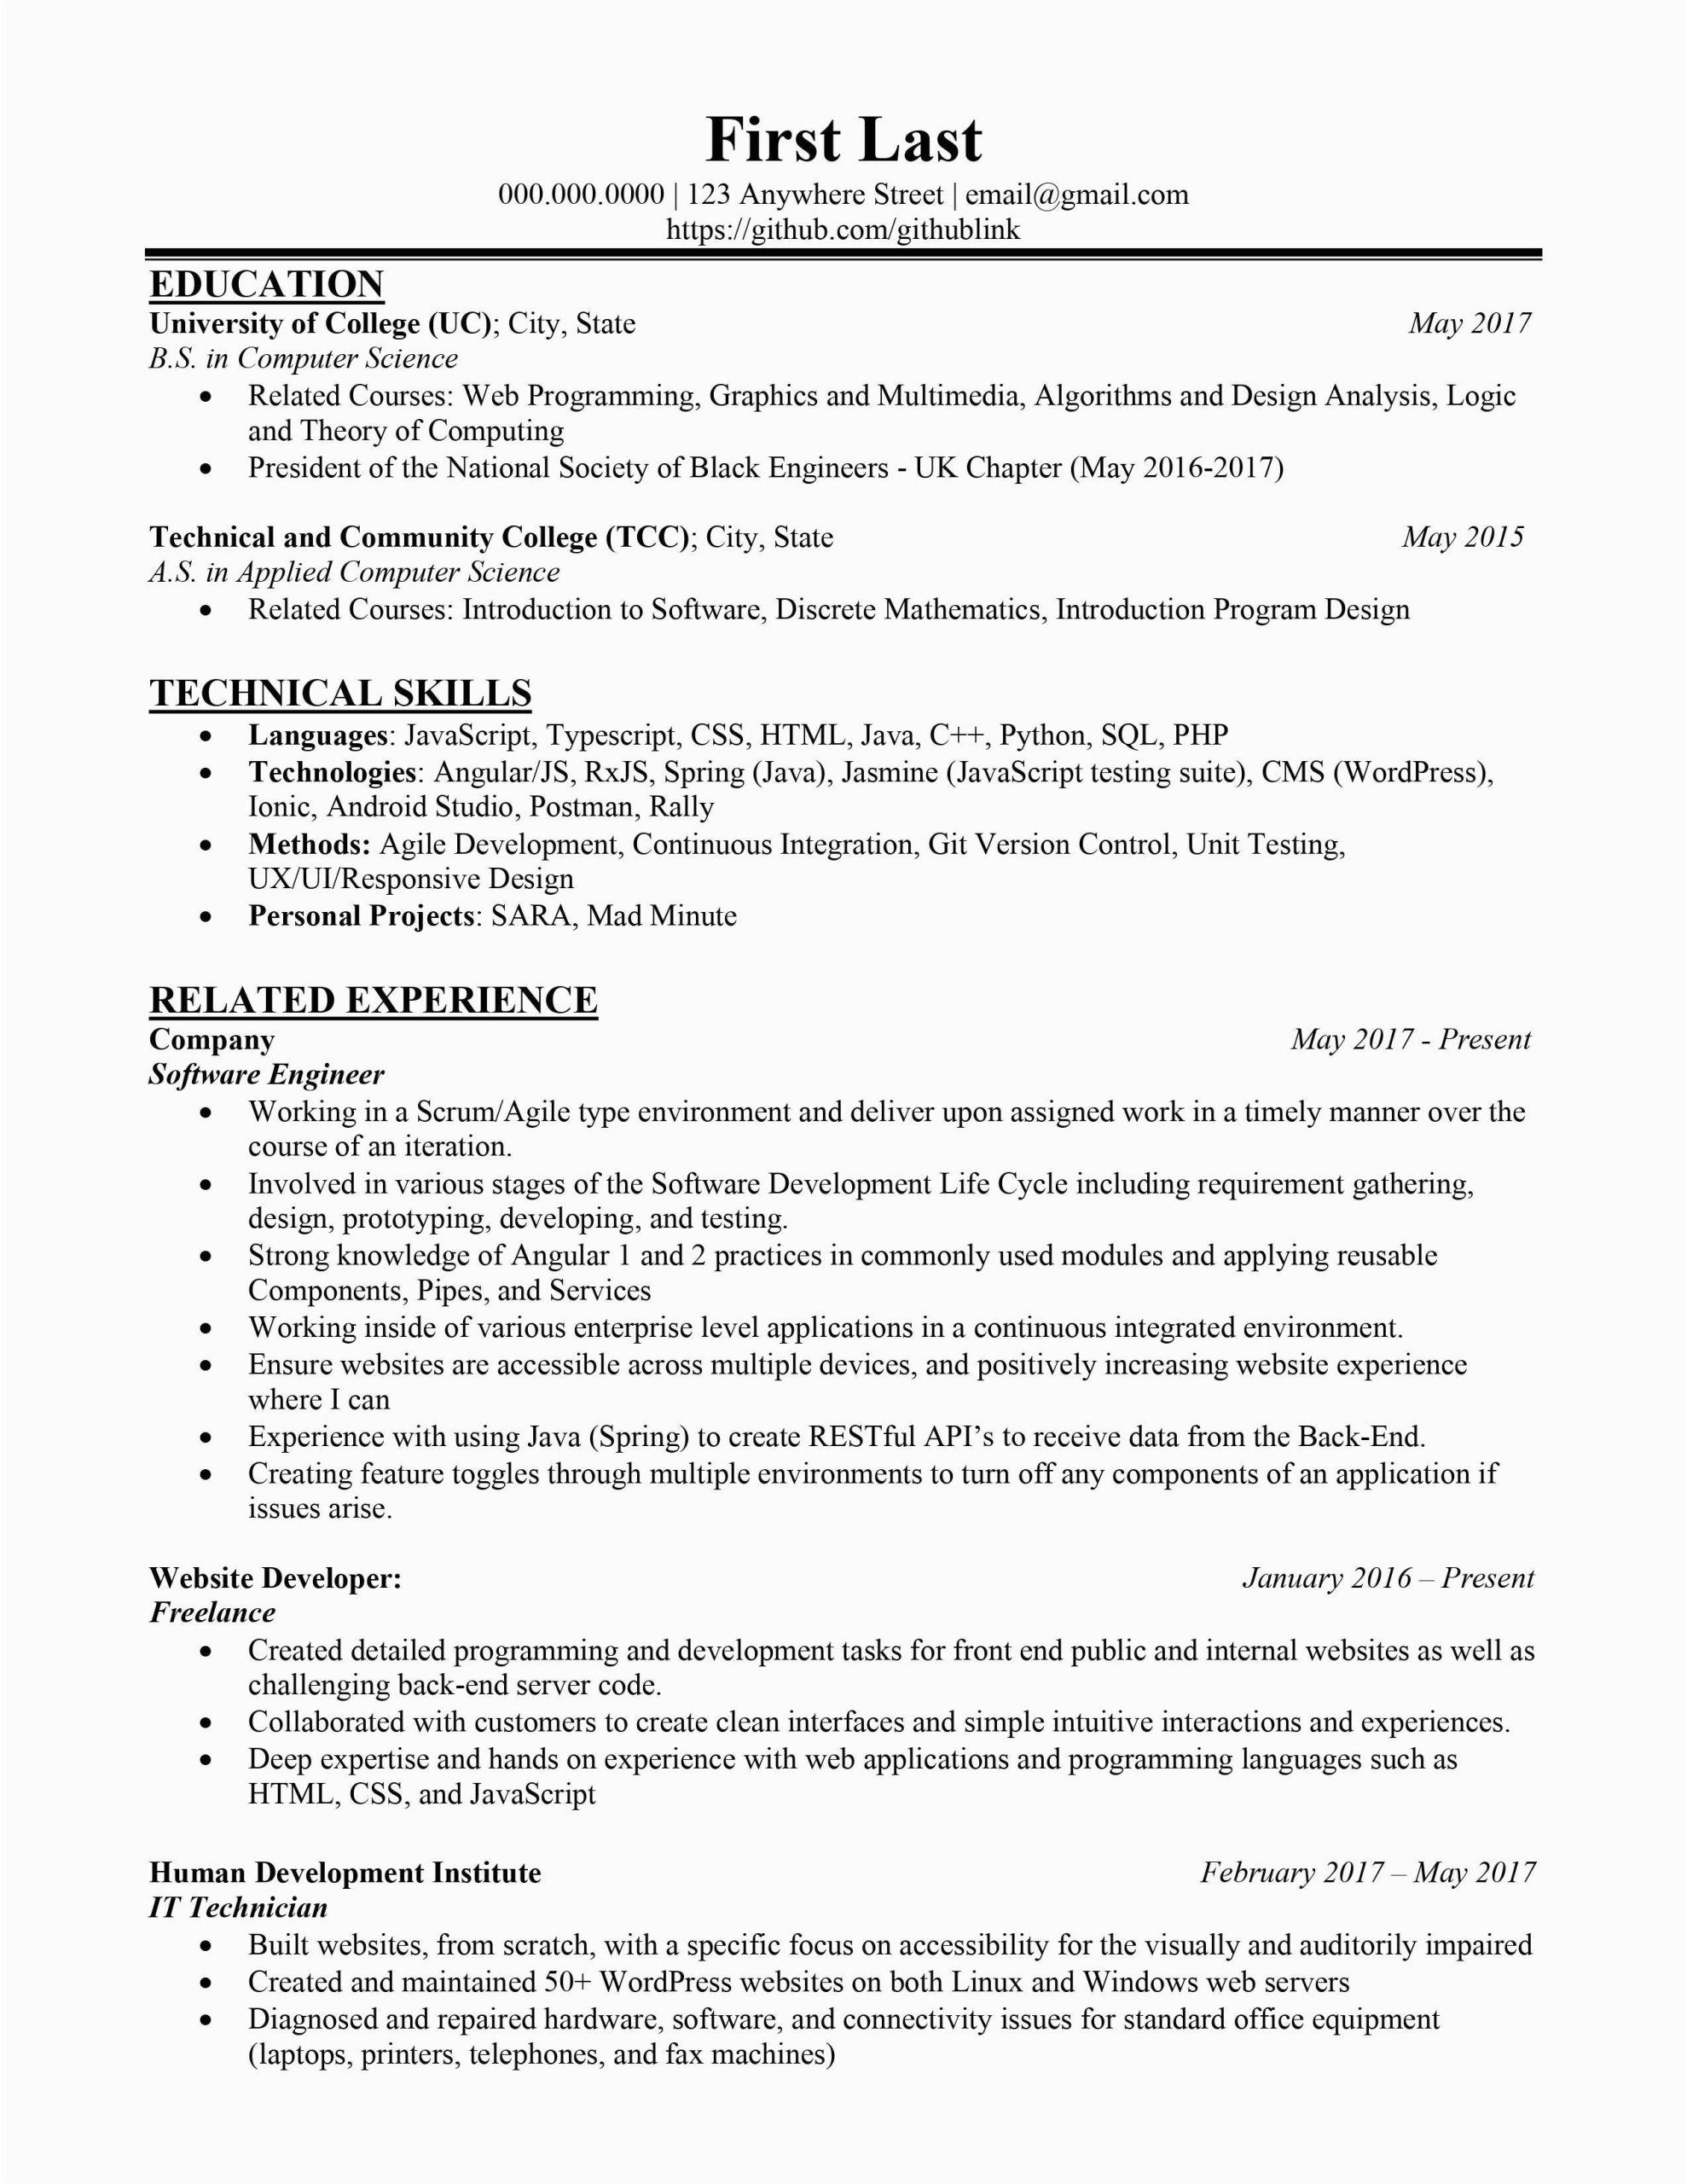 Resume Samples 3 5 Years Experience Looking for some Advice On My Resume software Engineer with 3 5 Years